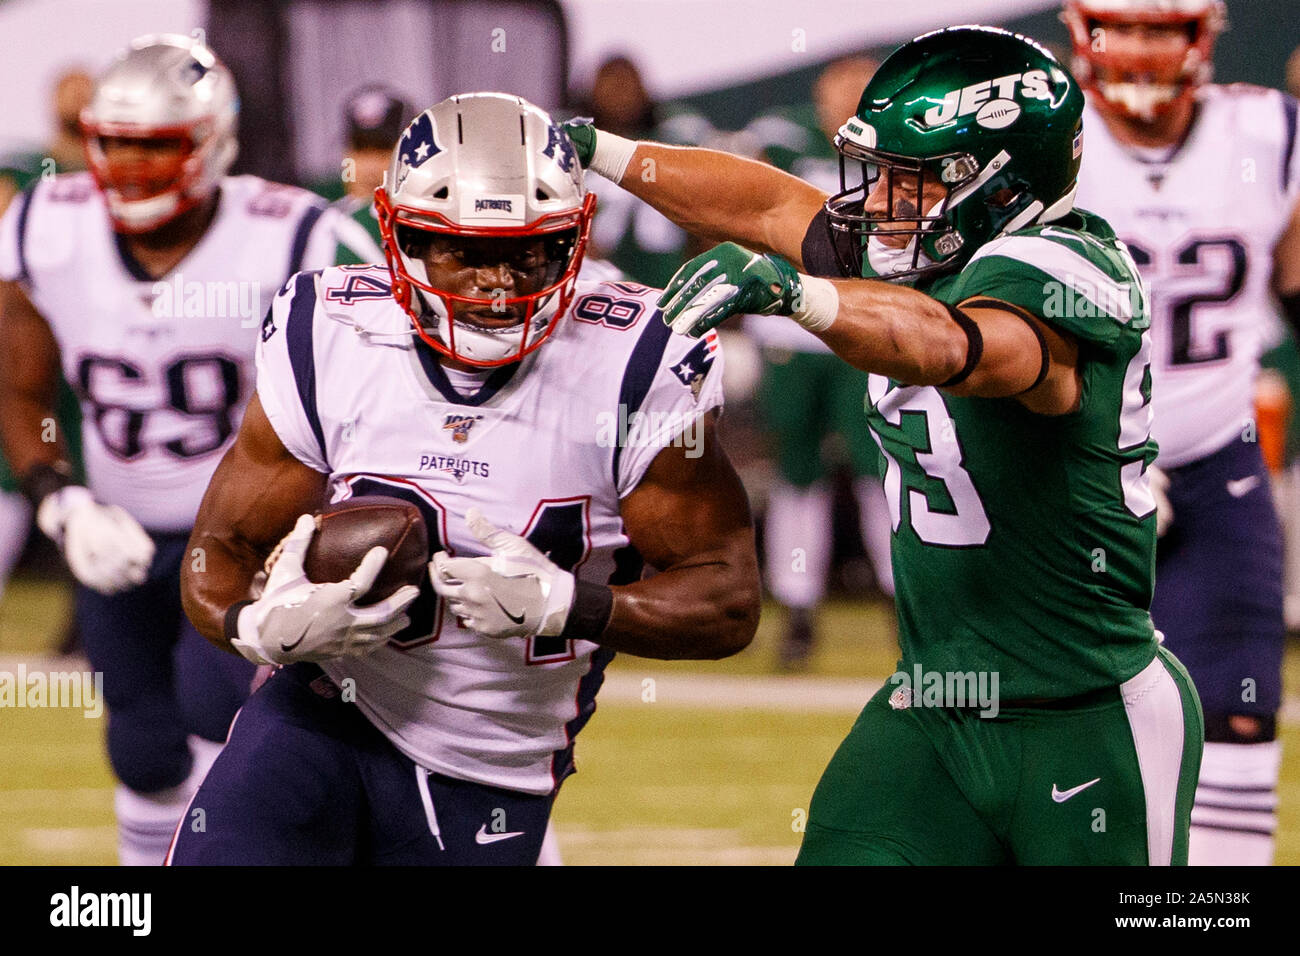 East Rutherford, New Jersey, USA. 21st Oct, 2019. New England Patriots  tight end Benjamin Watson (84) with the catch as New York Jets linebacker Blake  Cashman (53) reaches for him during the